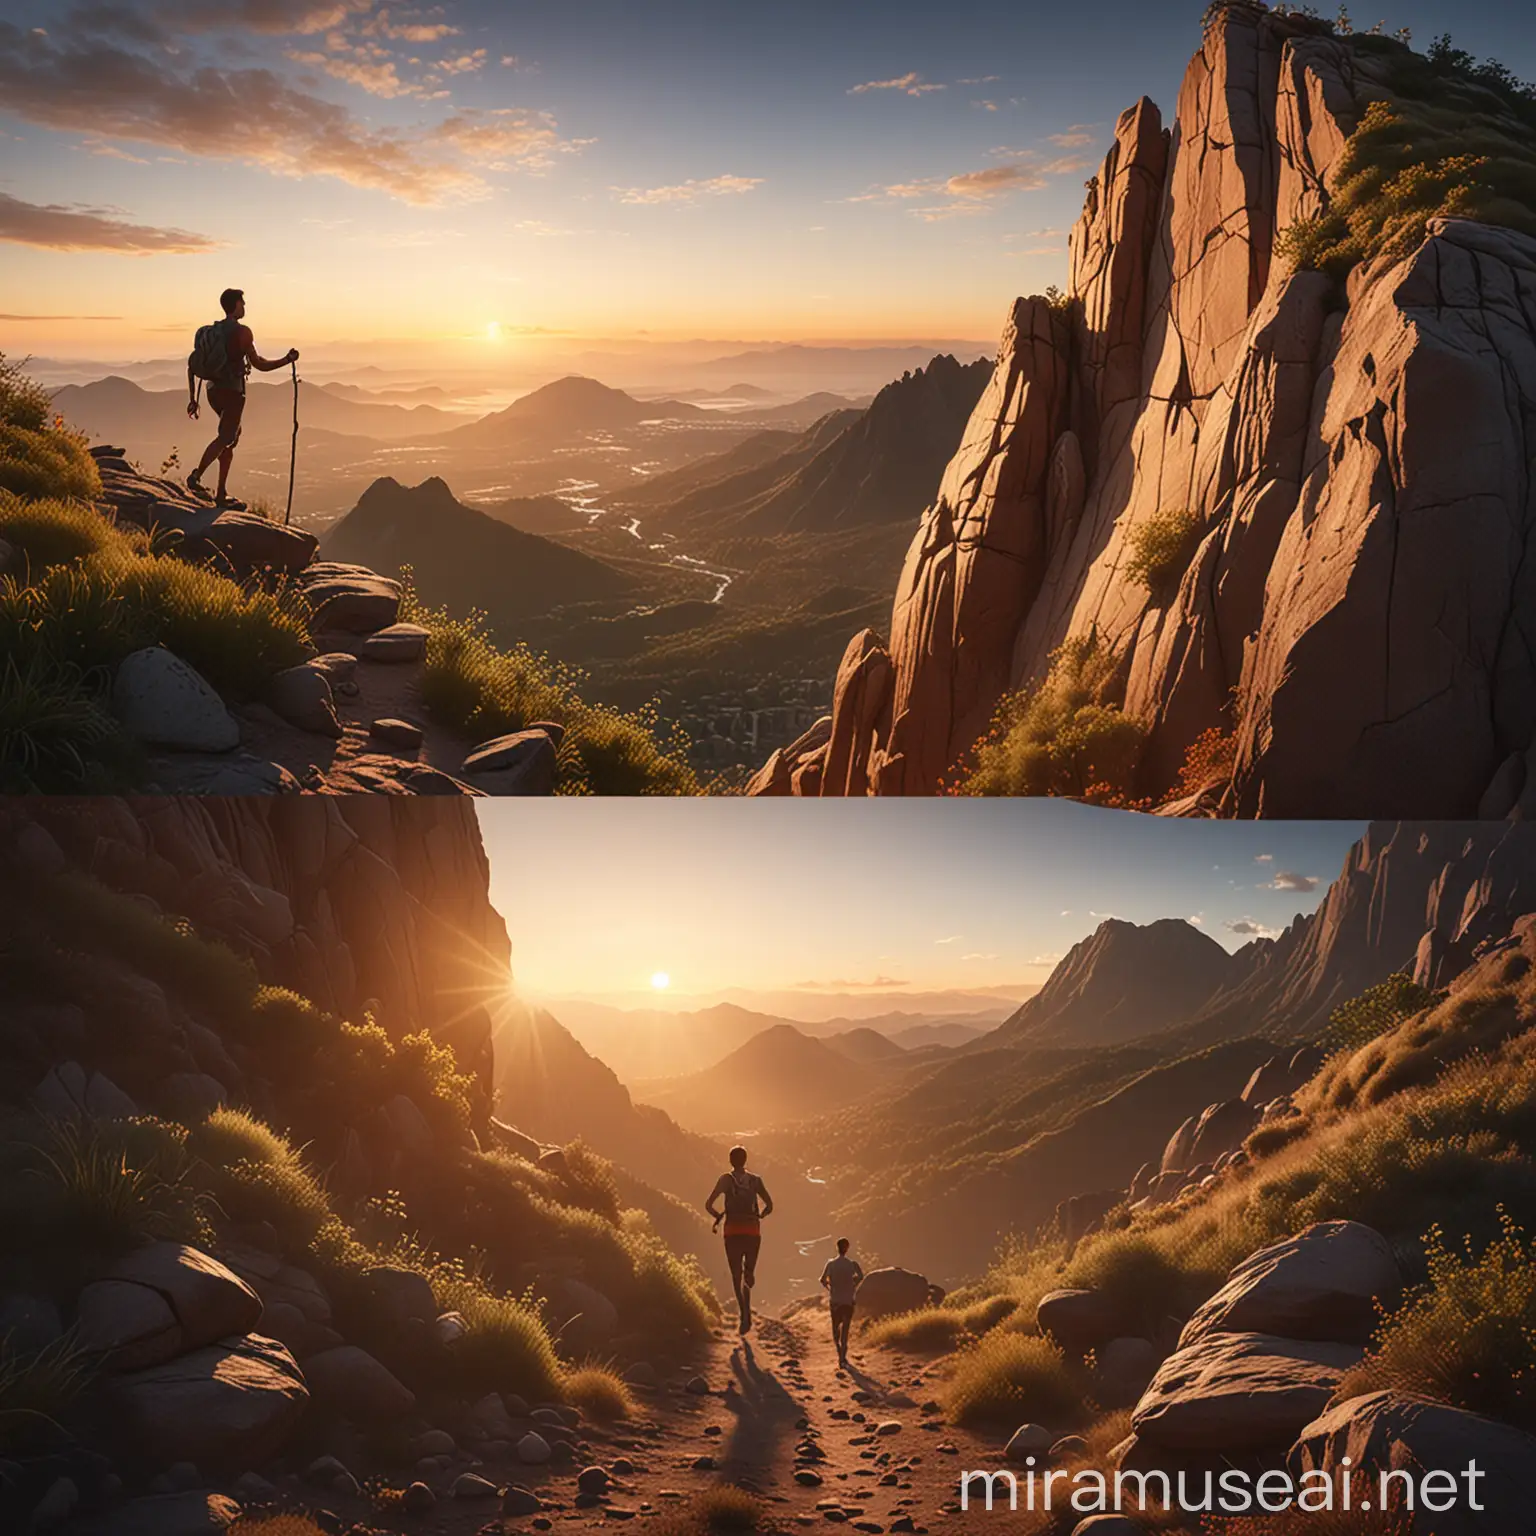 Image depicting diverse aspects of human potential and high performance. It features a person climbing a mountain, an individual meditating in a serene environment, and another person running on a trail at sunrise. Each scene captures a different dimension of achieving and unlocking human potential.